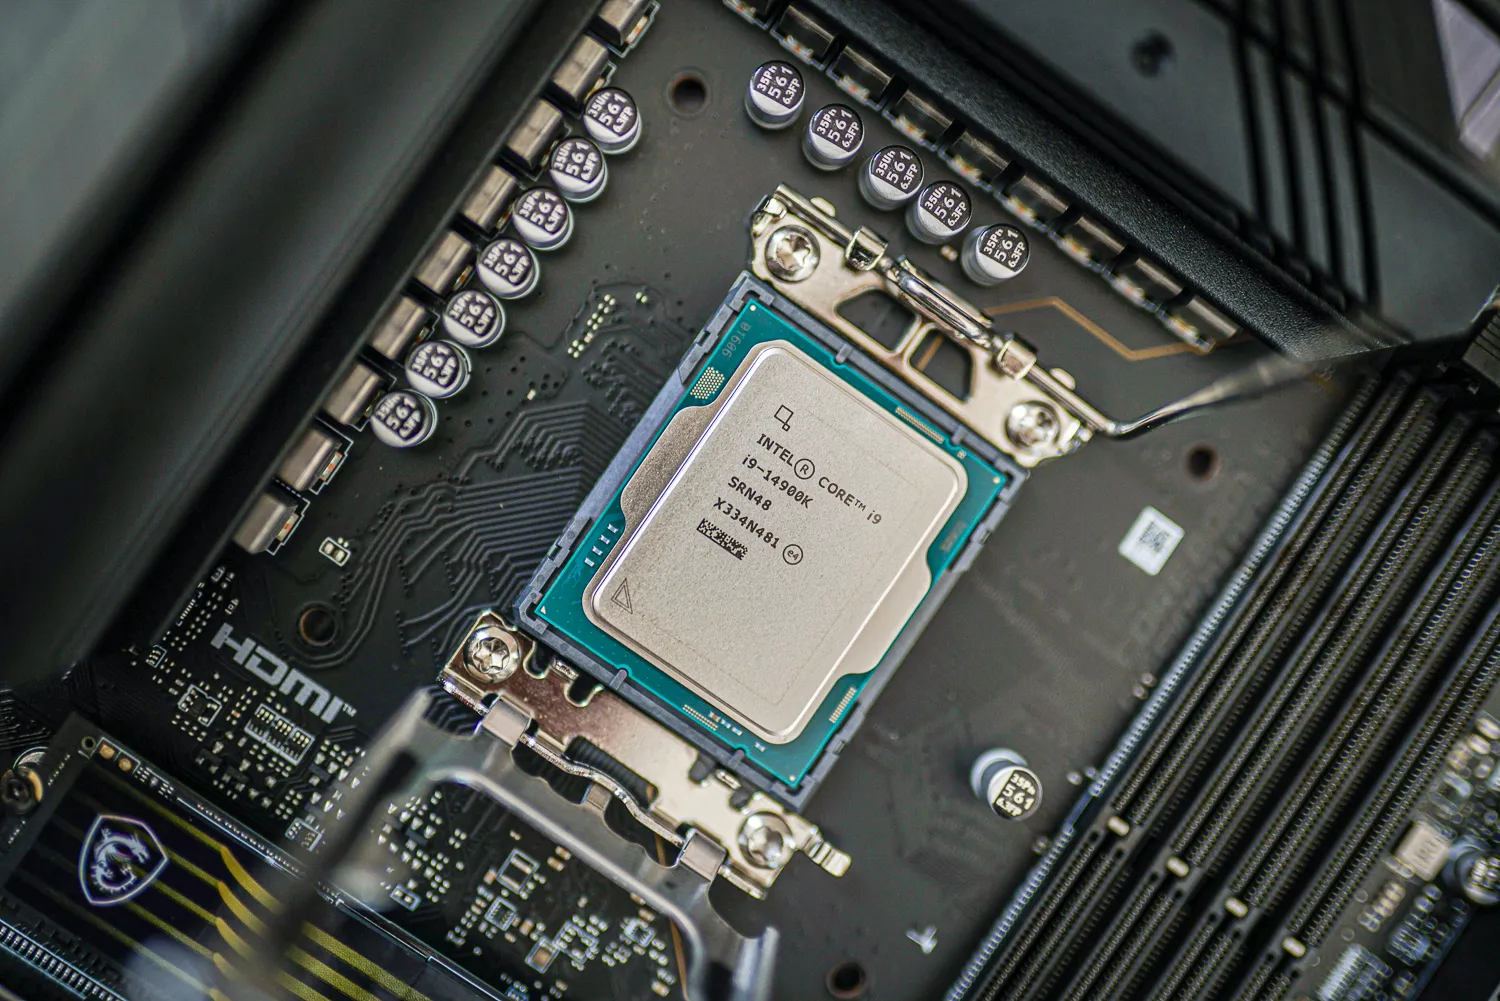 Intel’s 14900K CPU socketed in a motherboard.